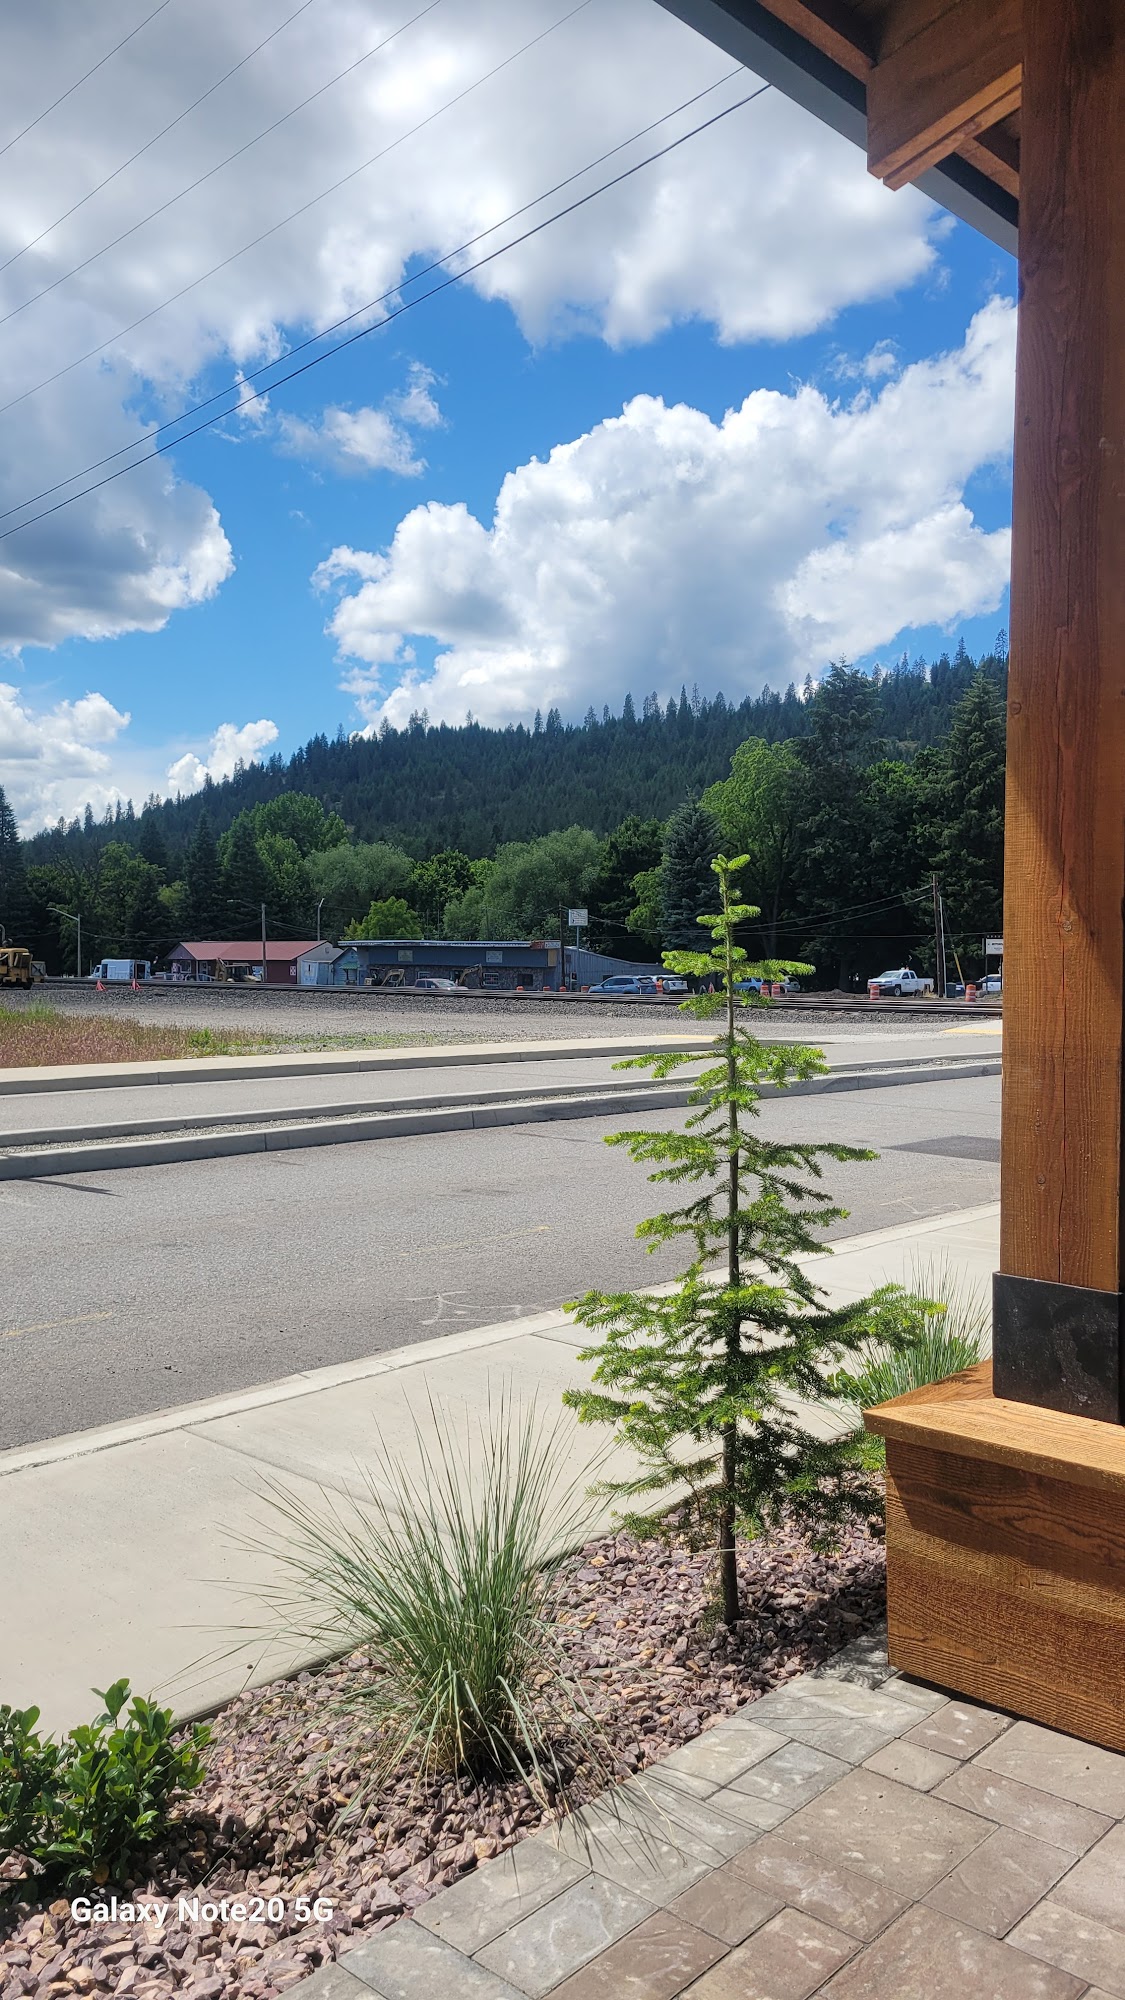 Cascadia Pizza Co. 8083 Main St, Rathdrum, ID 83858